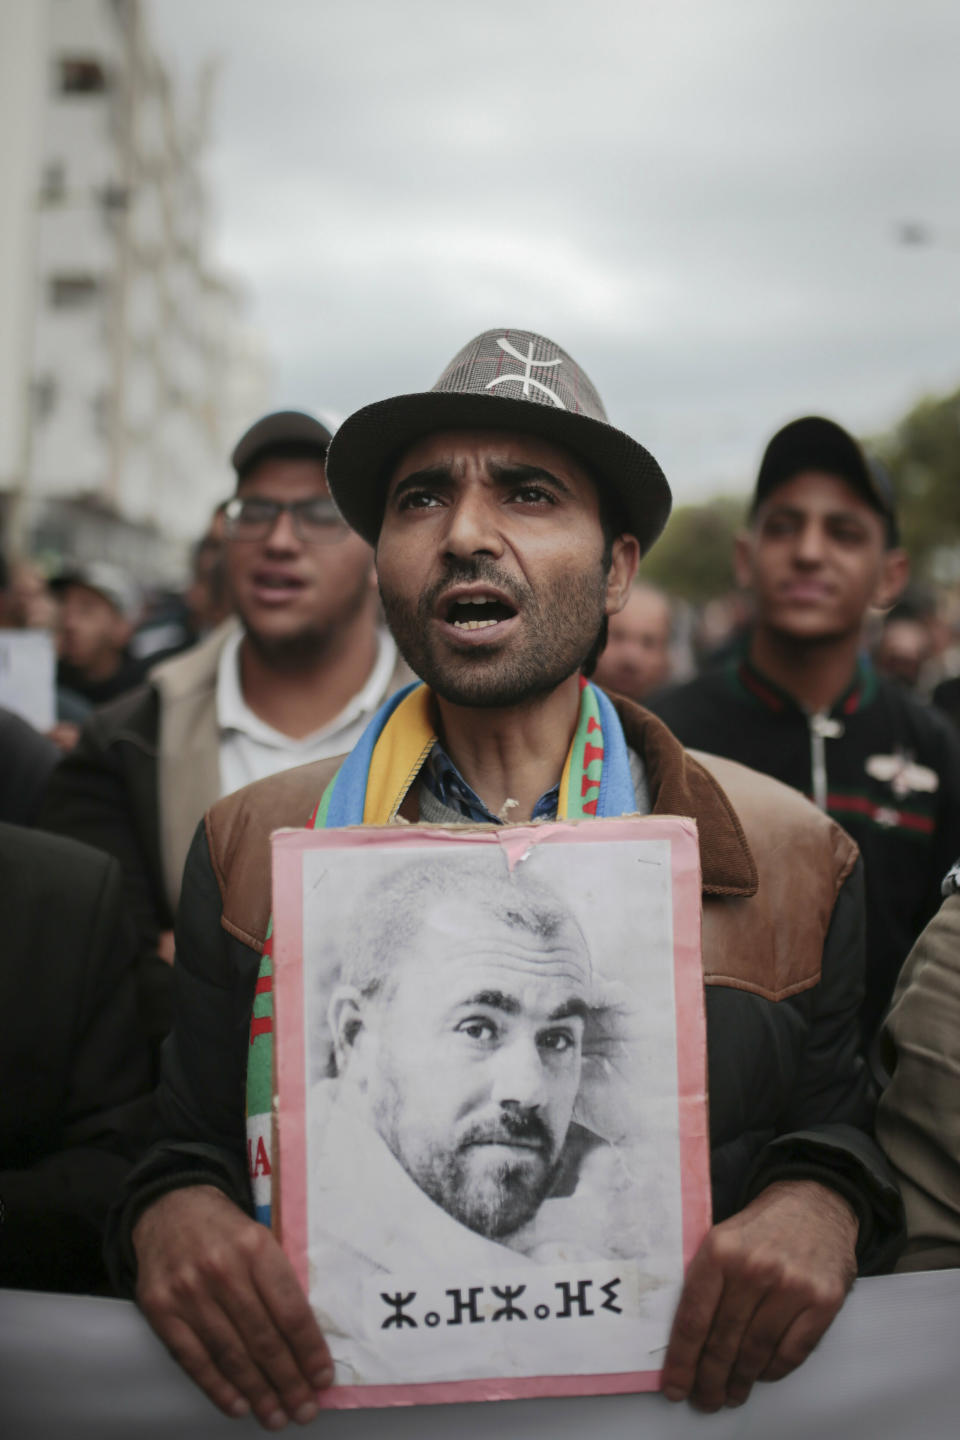 A protester holds a photo of Hirak leader Nasser Zefzafi during a demonstration in Rabat, Morocco, Sunday, April 21, 2019. Protesters are condemning prison terms for the leader of the Hirak Rif protest movement against poverty and dozens of other activists. Banner in Berber reads Zefzafi's name. (AP Photo/Mosa'ab Elshamy)